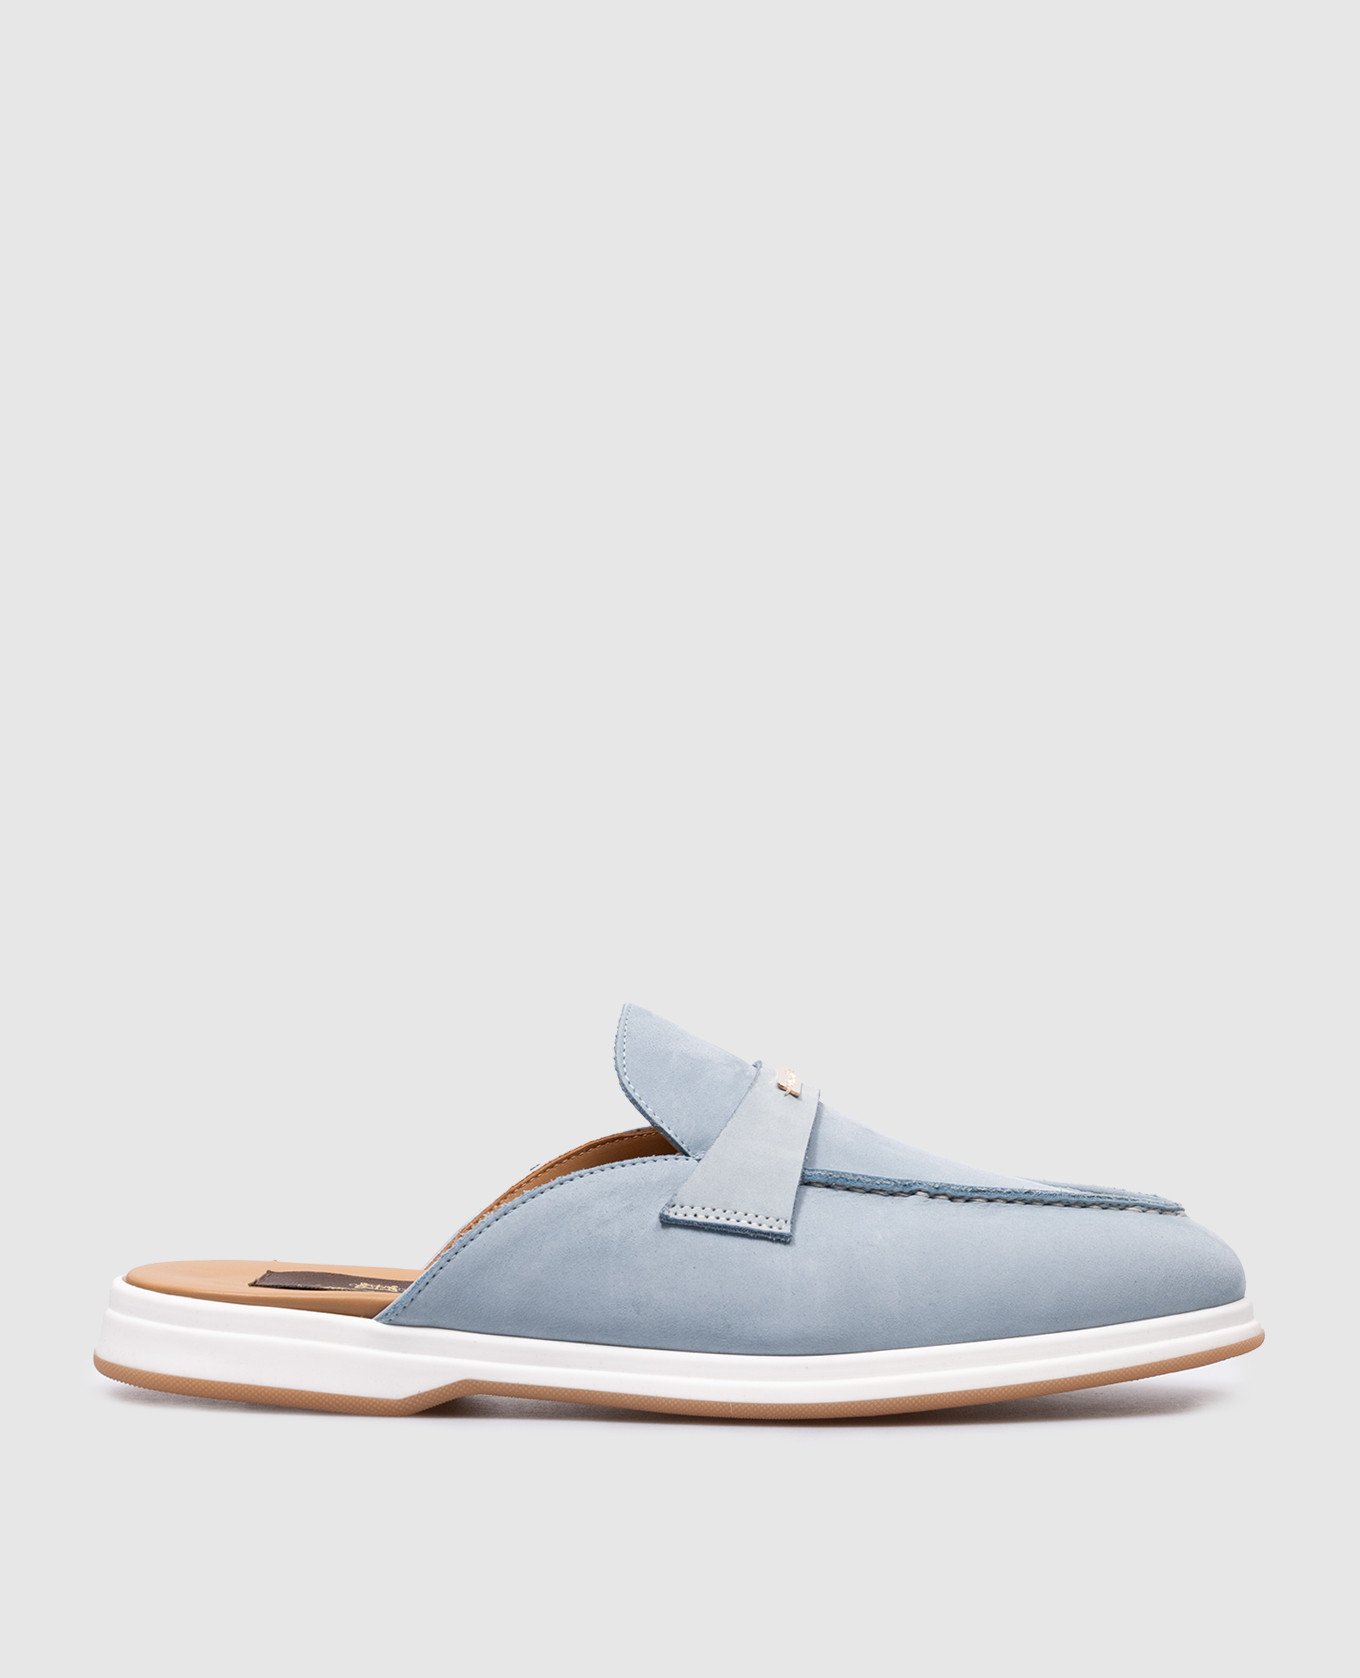 Blue suede mules with metallic logo